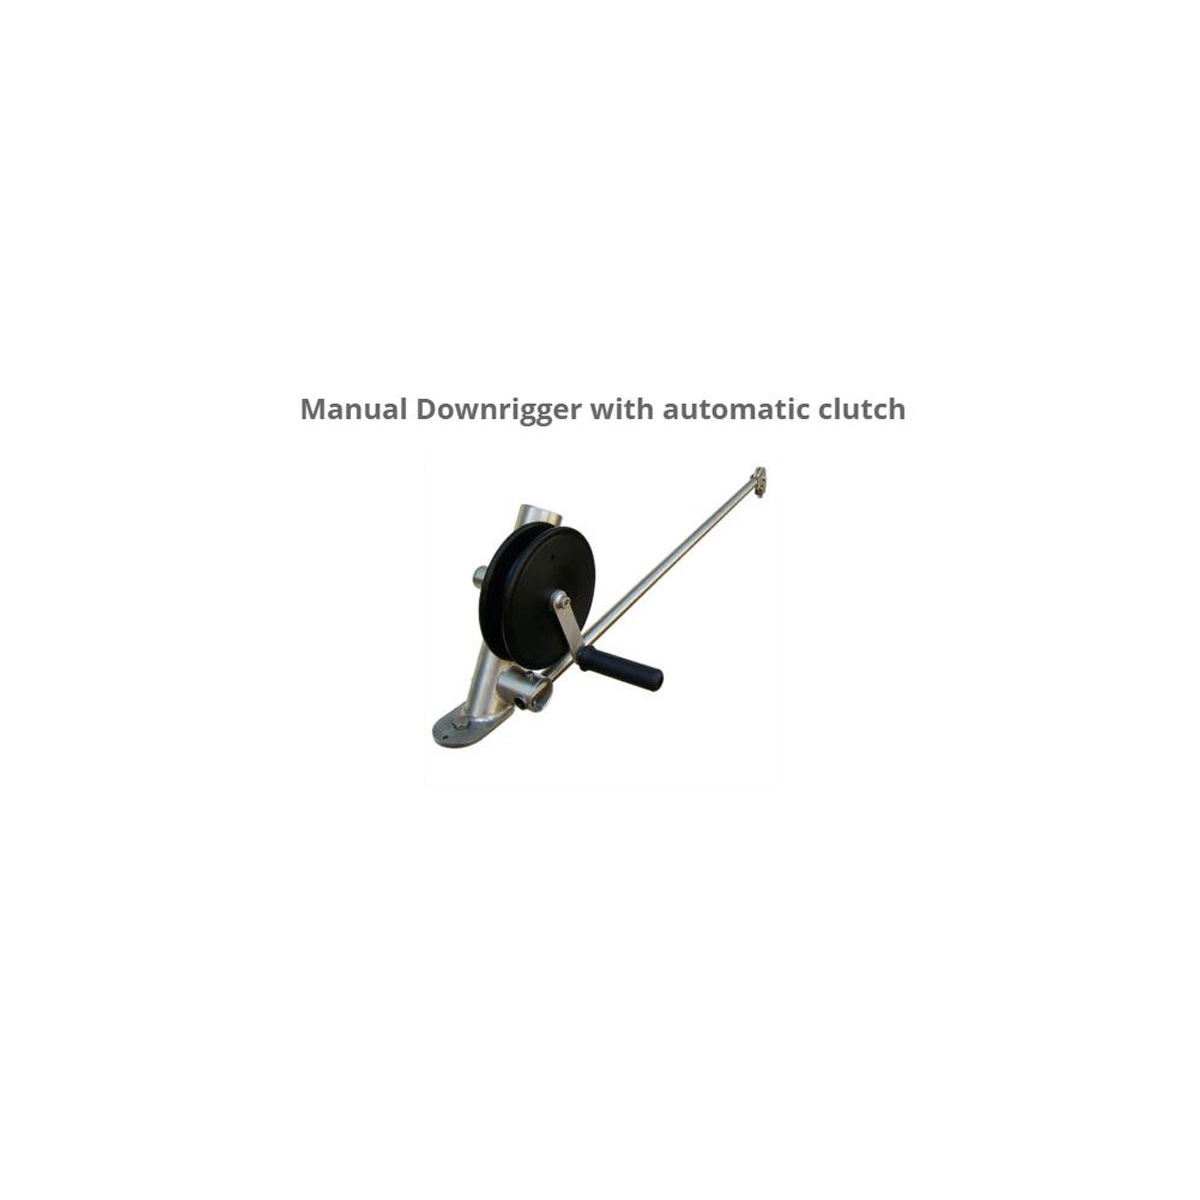 Sardamatic Manual Downrigger with automatic clutch